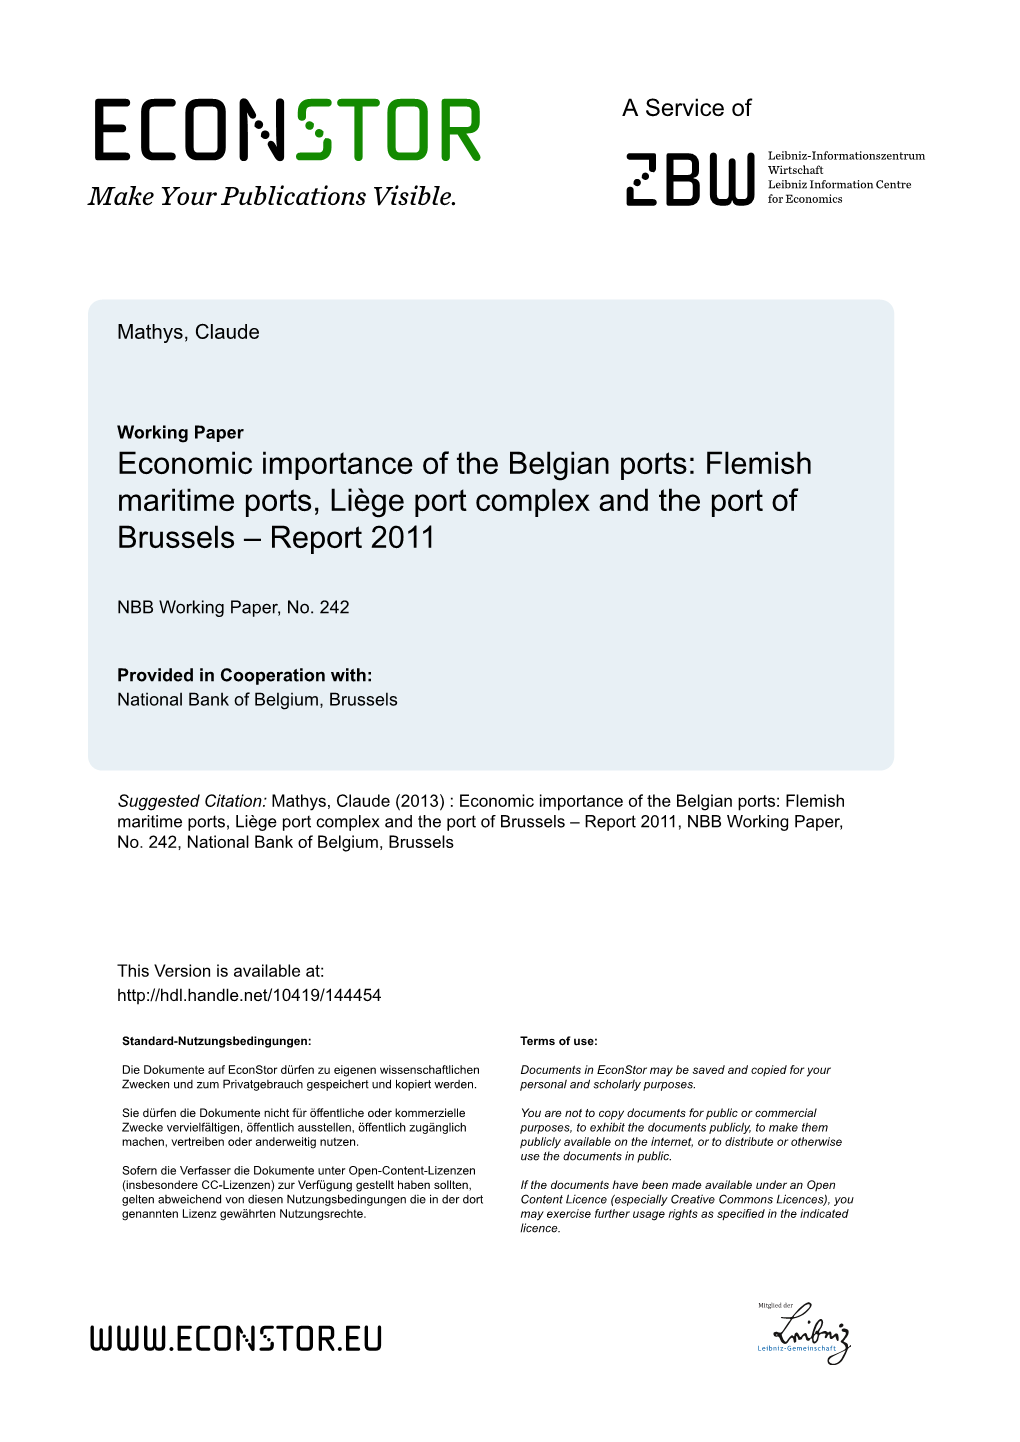 Economic Importance of the Belgian Ports: Flemish Maritime Ports, Liège Port Complex and the Port of Brussels – Report 2011